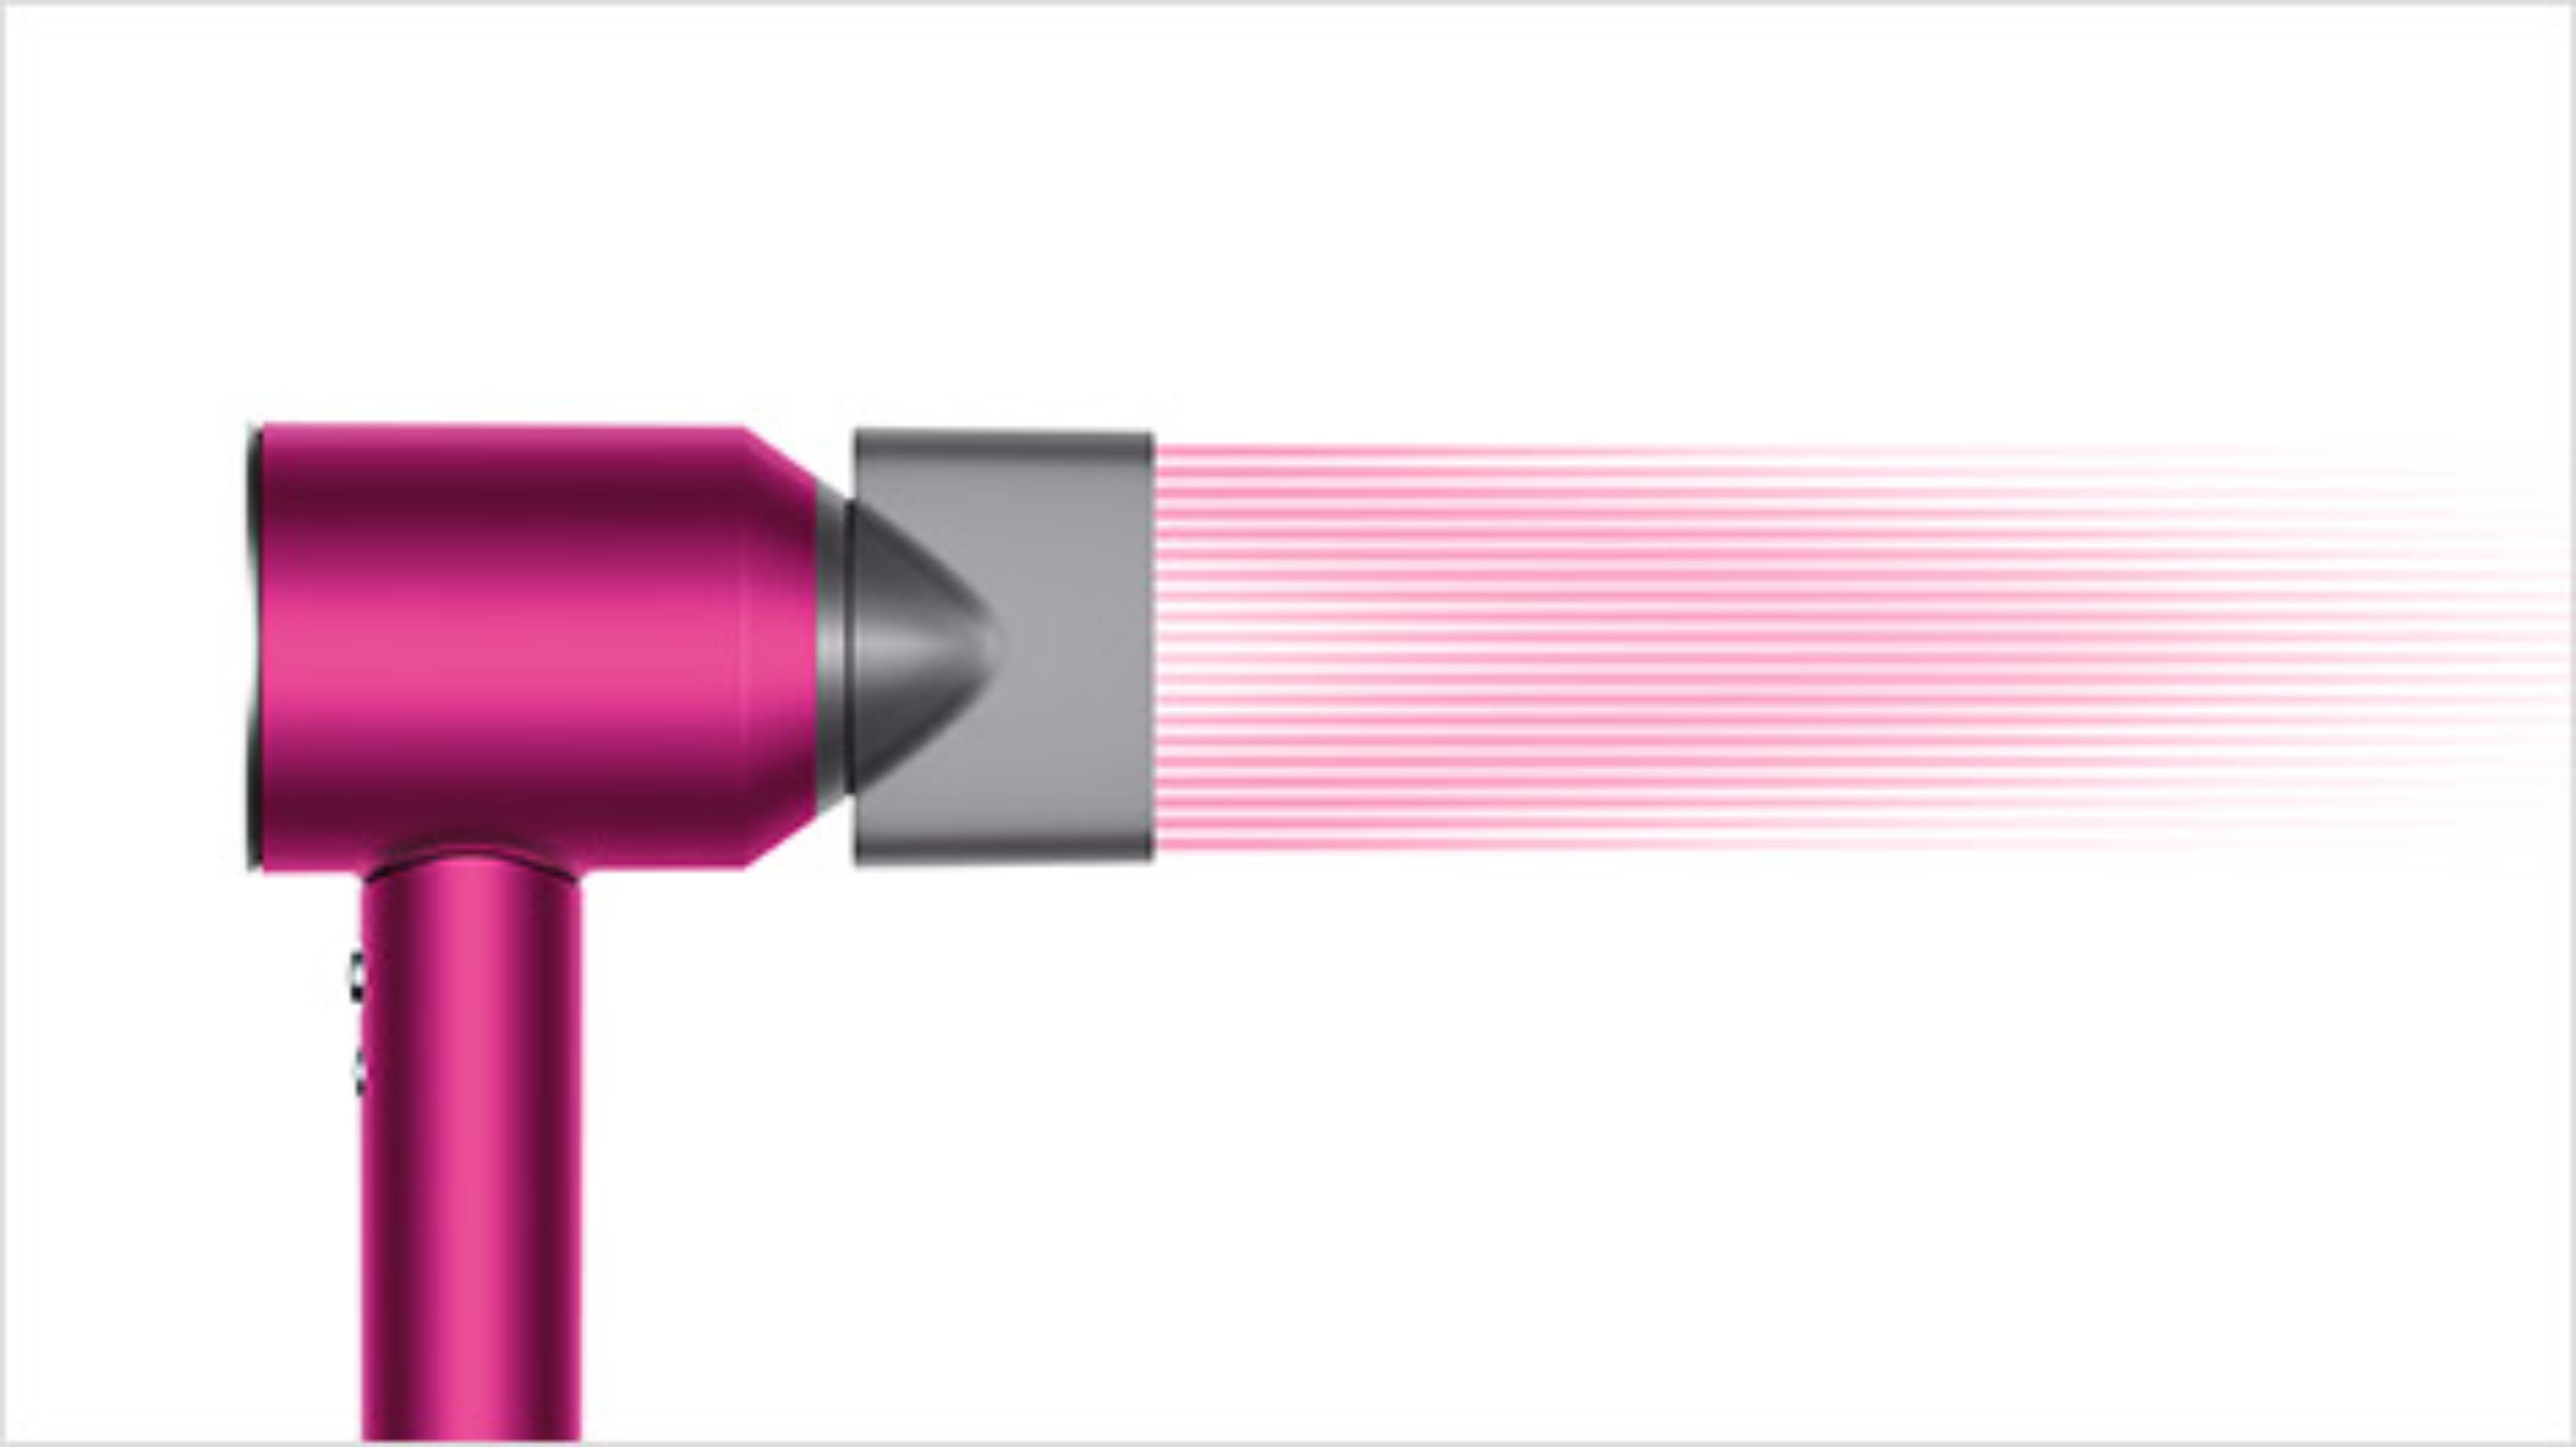 Dyson Supersonic with Re-engineered Styling concentrator